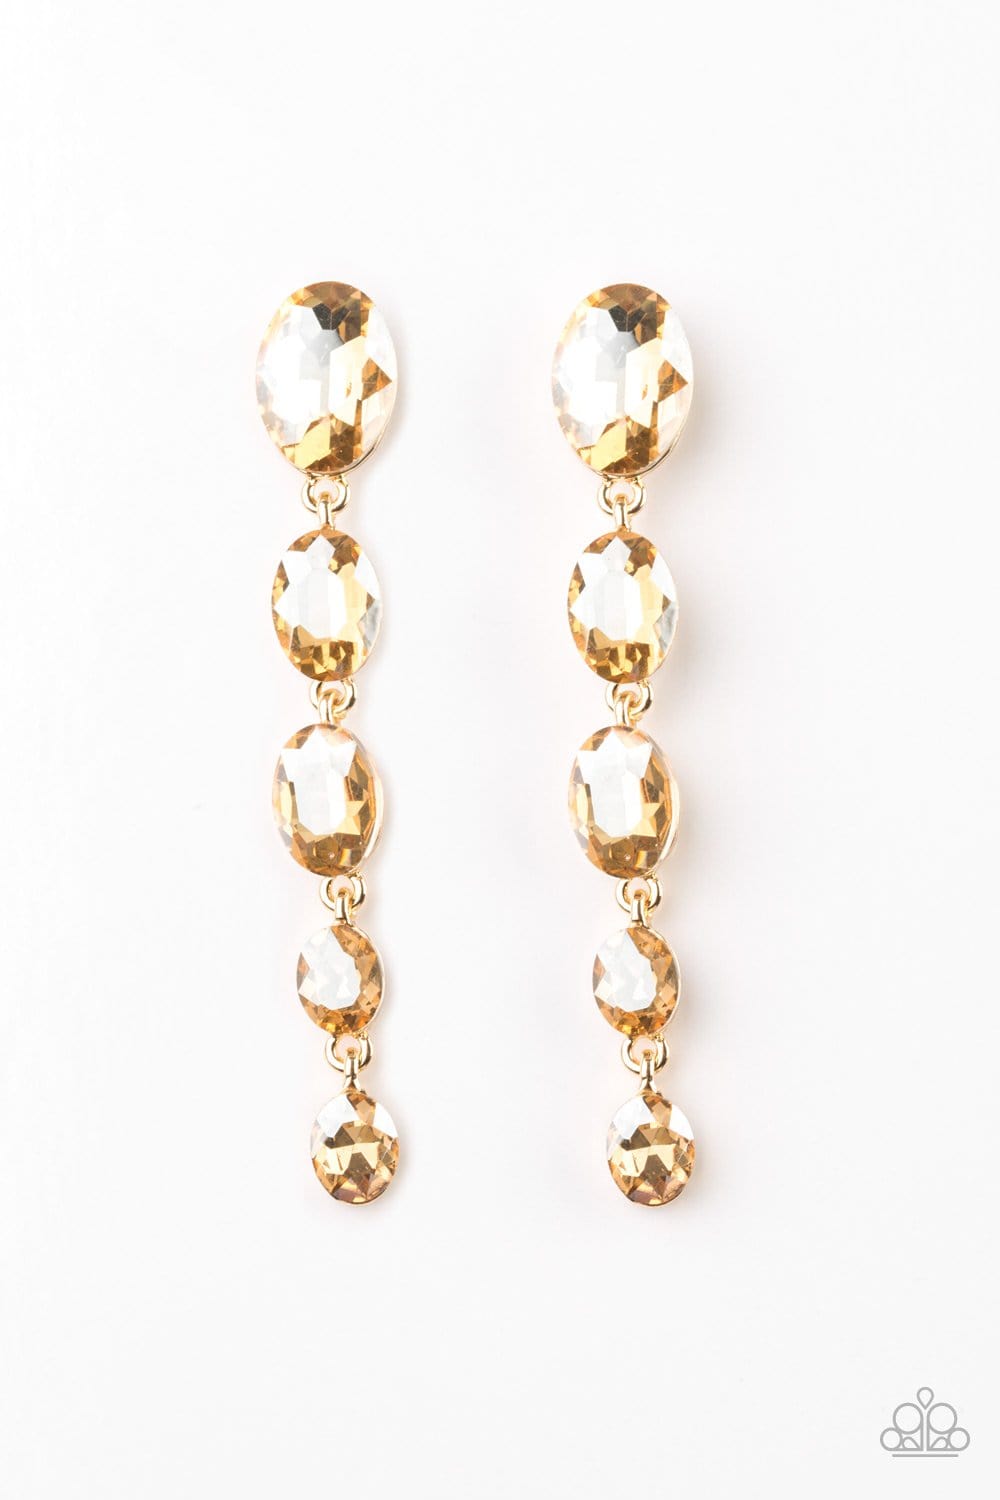 Paparazzi Red Carpet Radiance Post Earrings